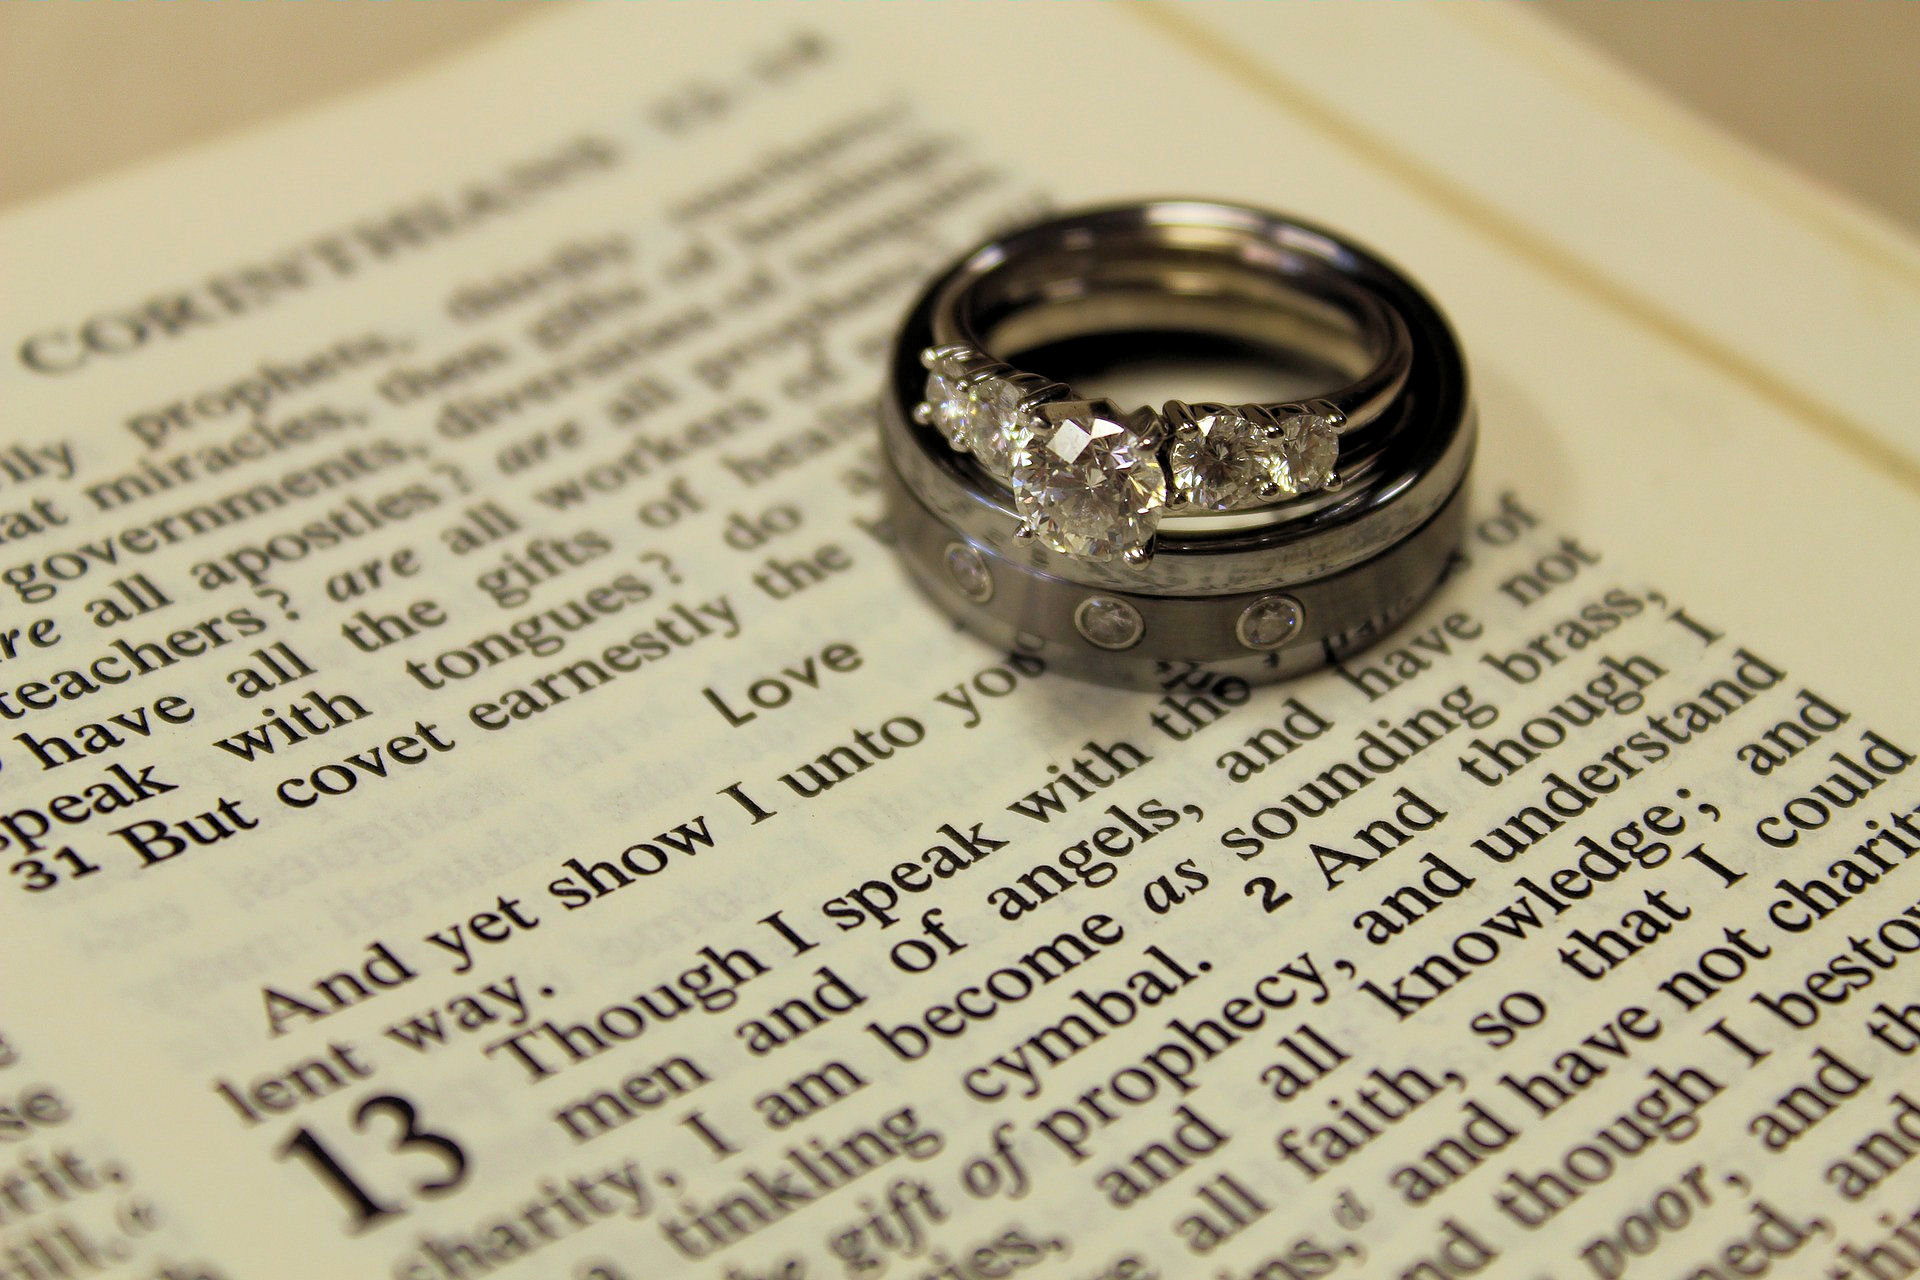 Bible open at 1
                    Corinthians 13 with wedding and engagement rings
                    lying on the page